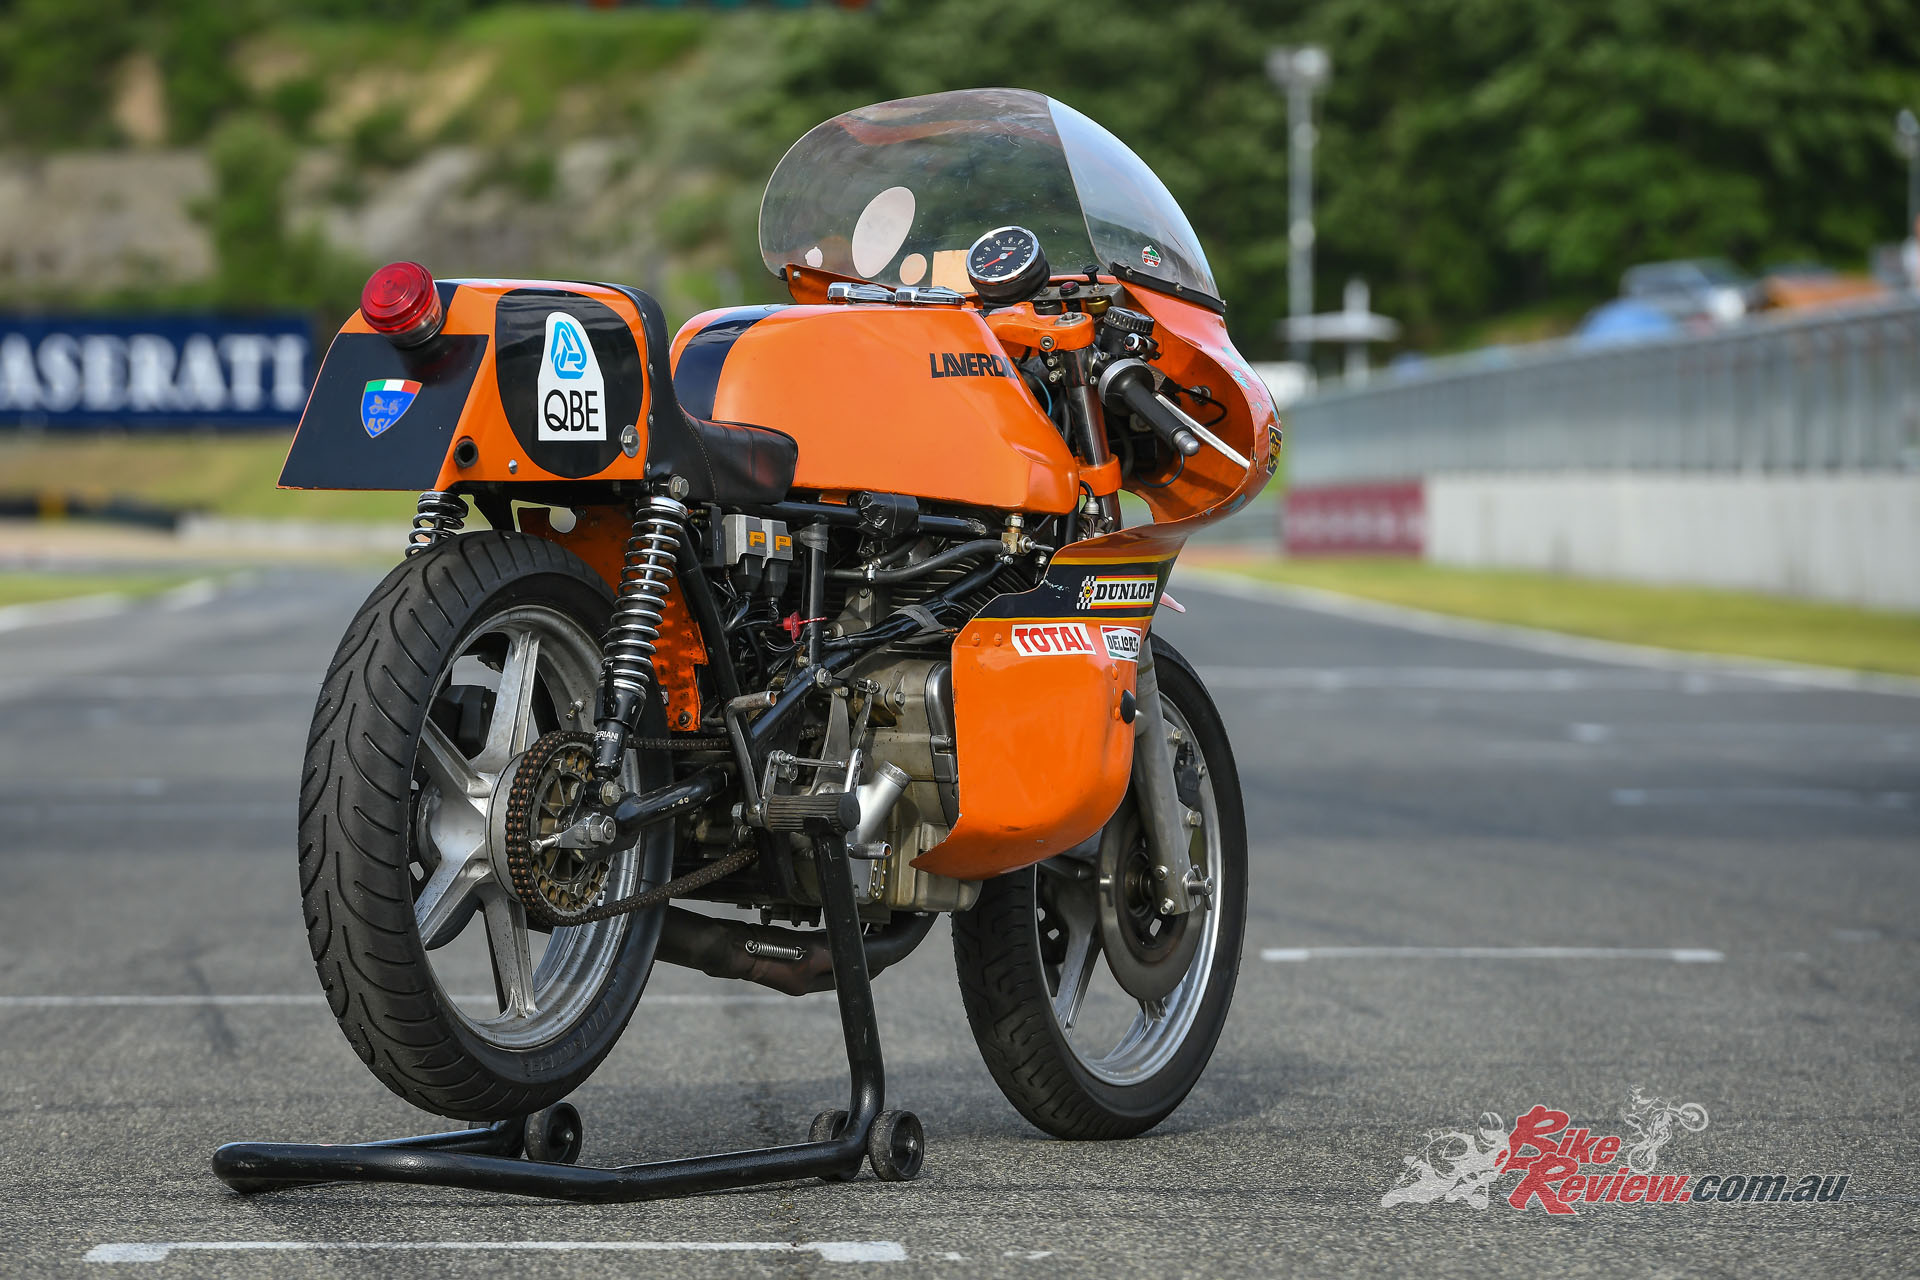 One of the more forgotten brands of the 70s. Laverda made waves in endurance racing...